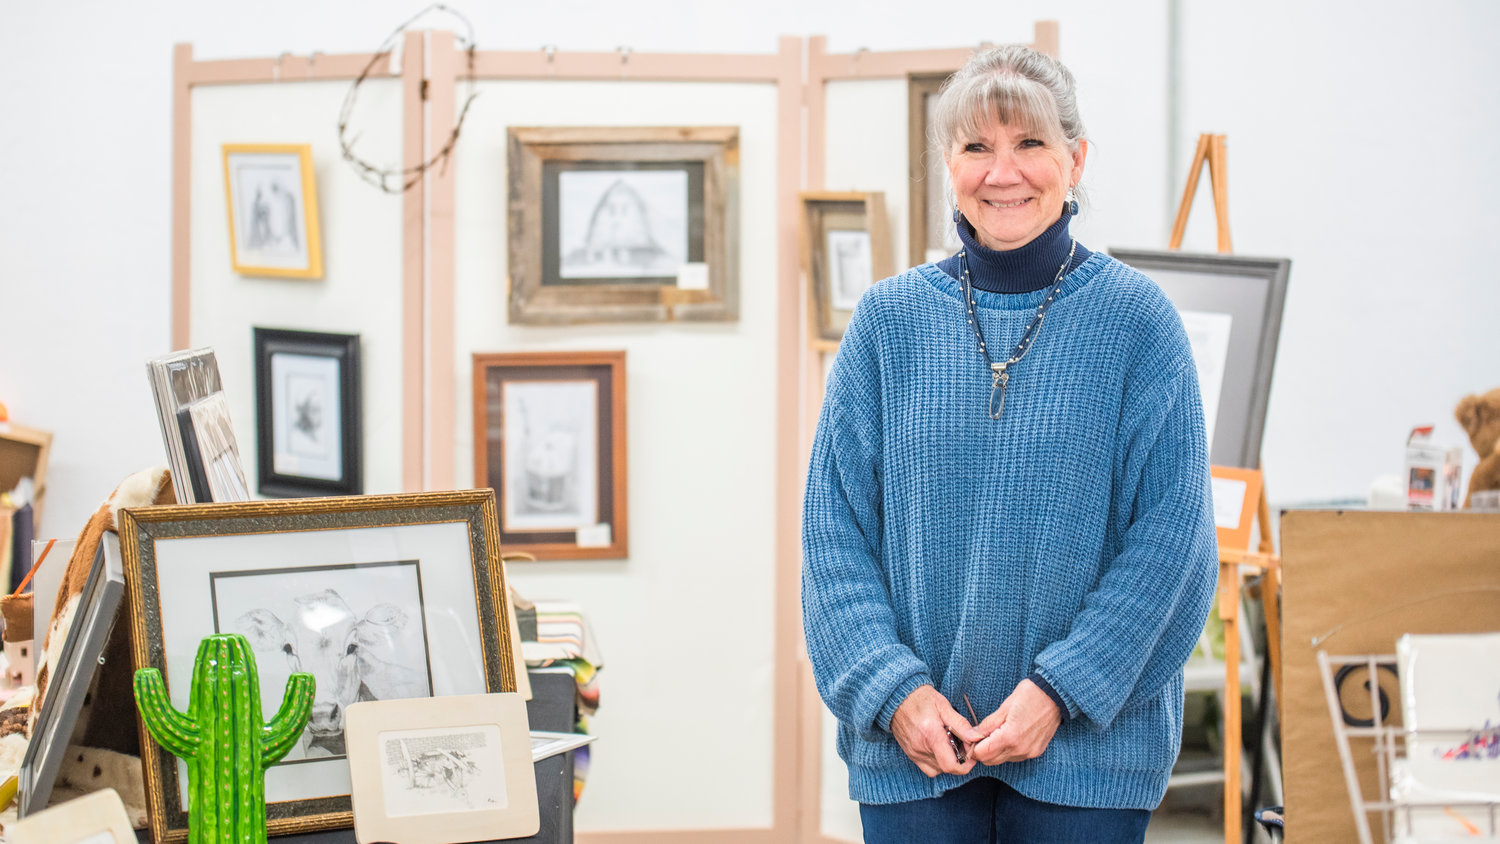 Pat Anderson smiles while standing next to her art on display at the Southwest Washington Fairgrounds in Centralia on Saturday during the Spring Community Garage Sale.